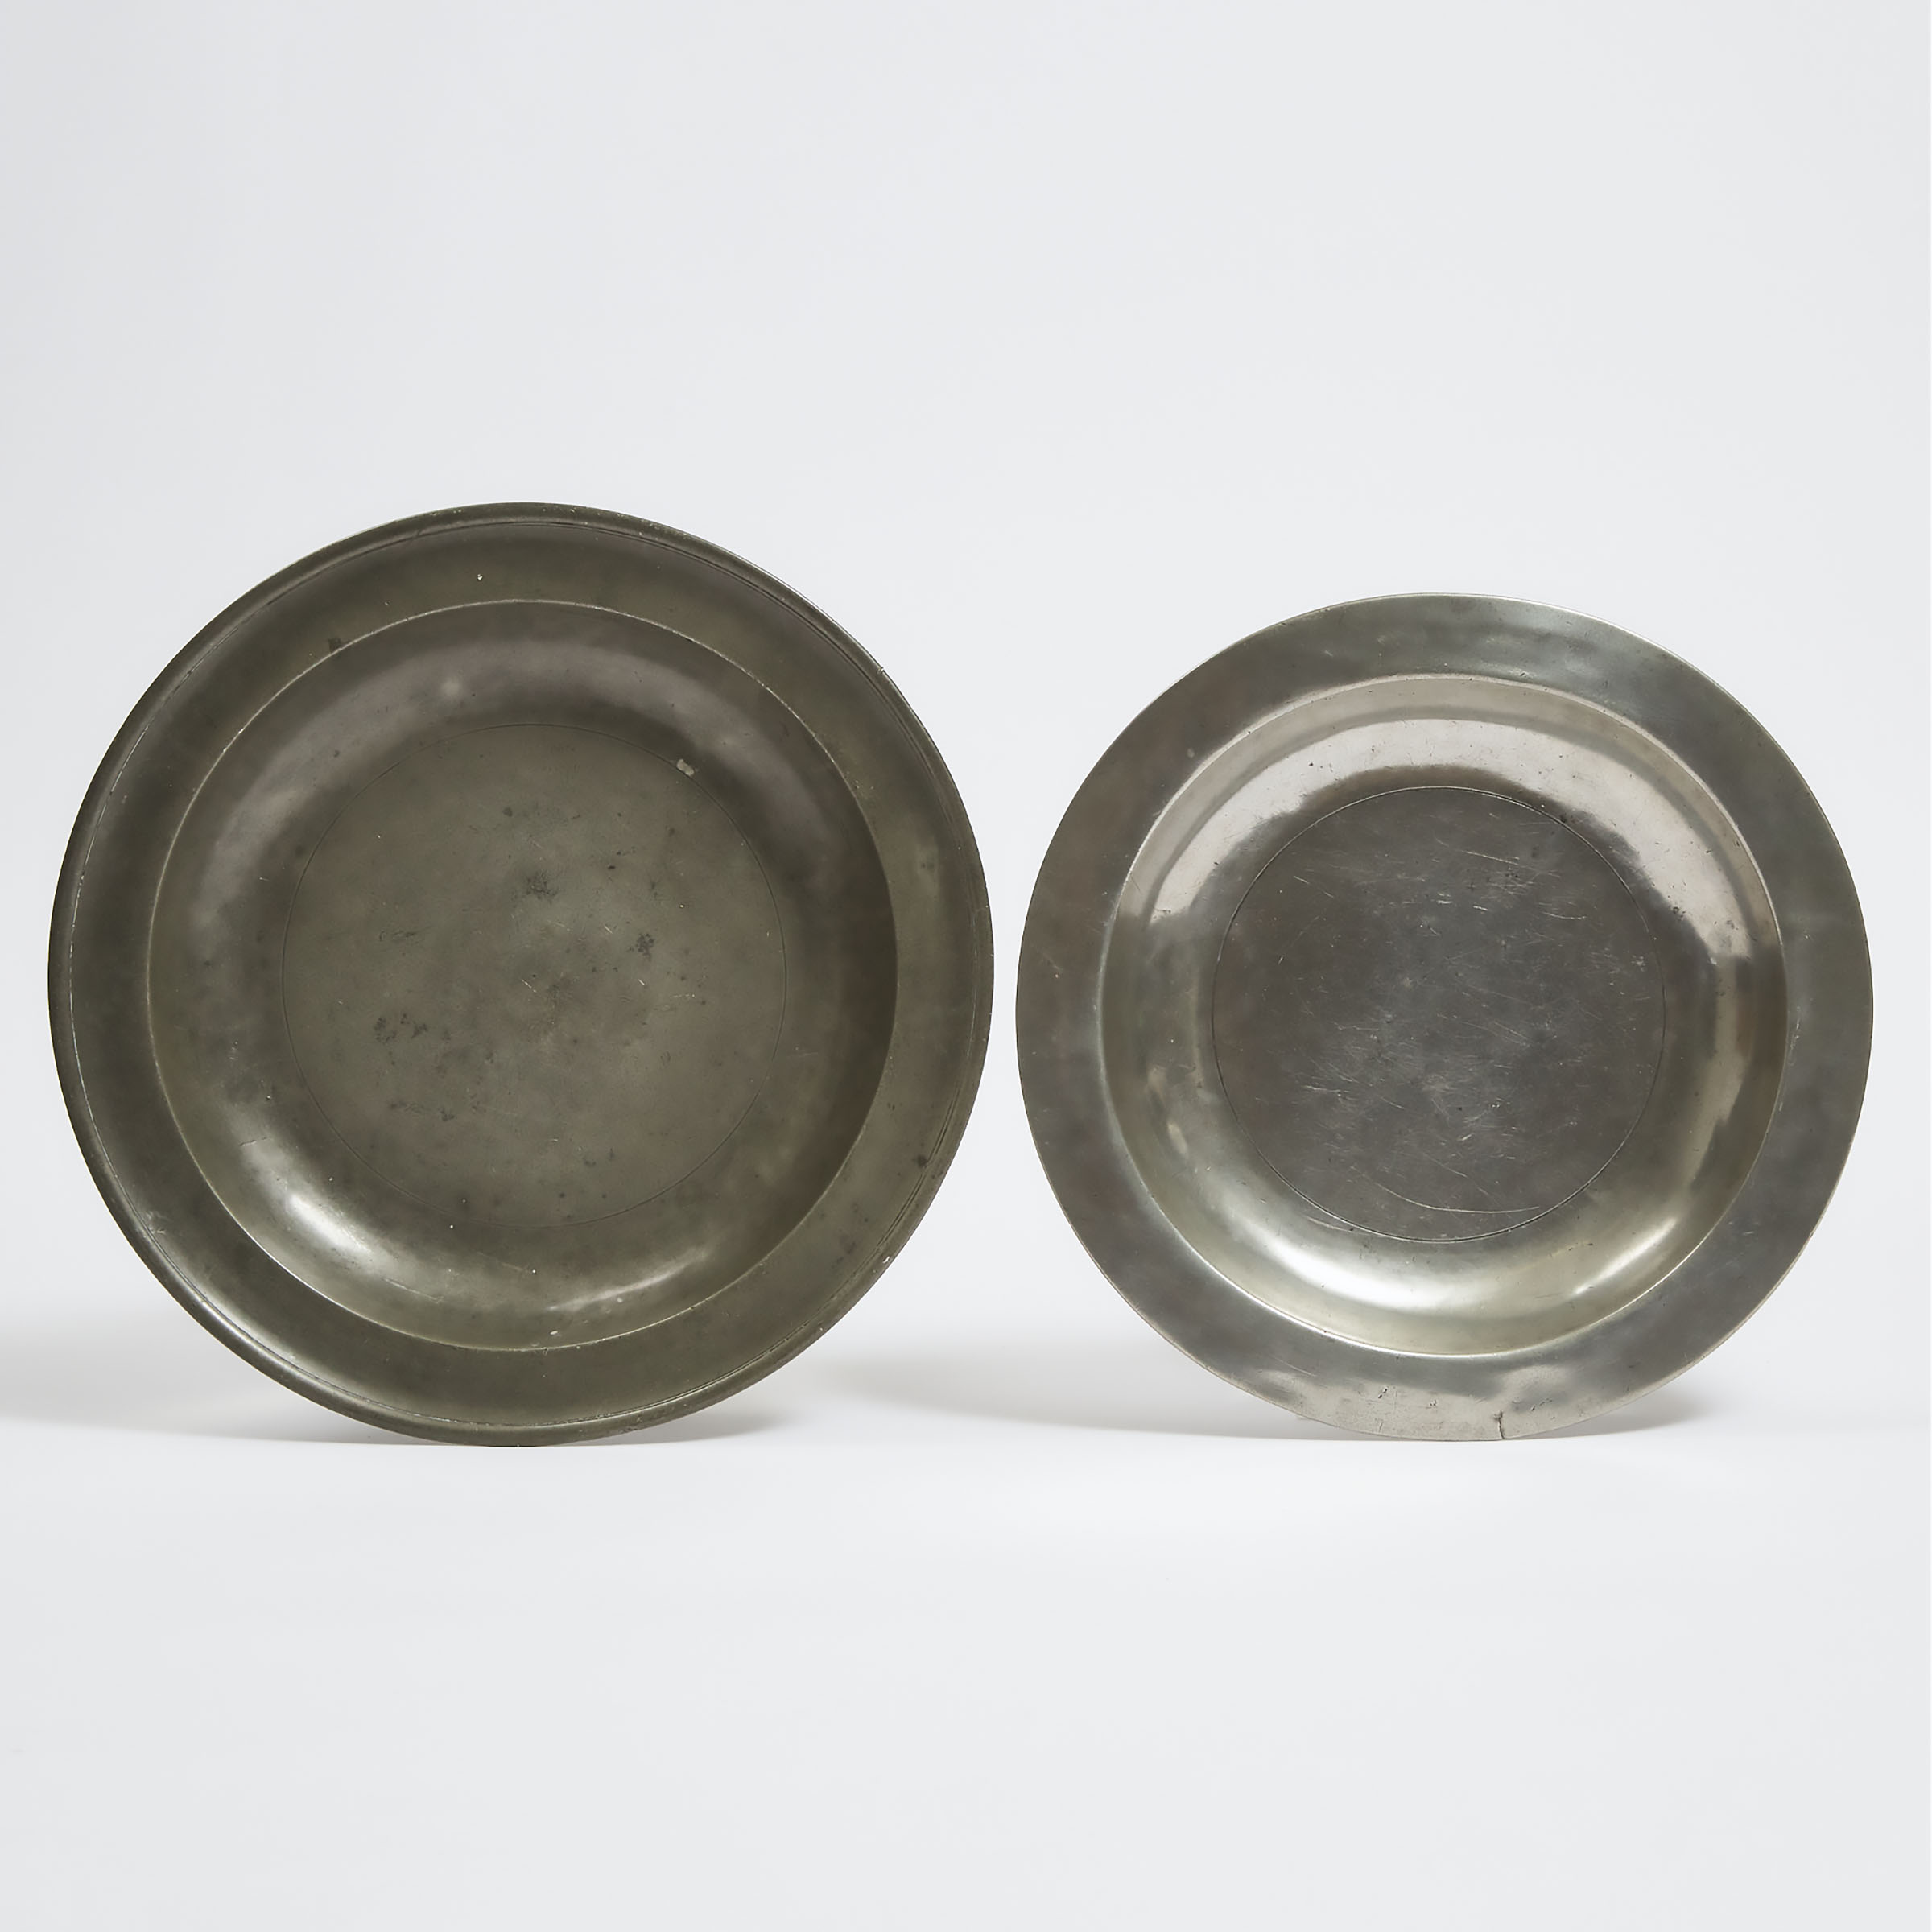 Two English Pewter Dishes, 17th and 18th centuries